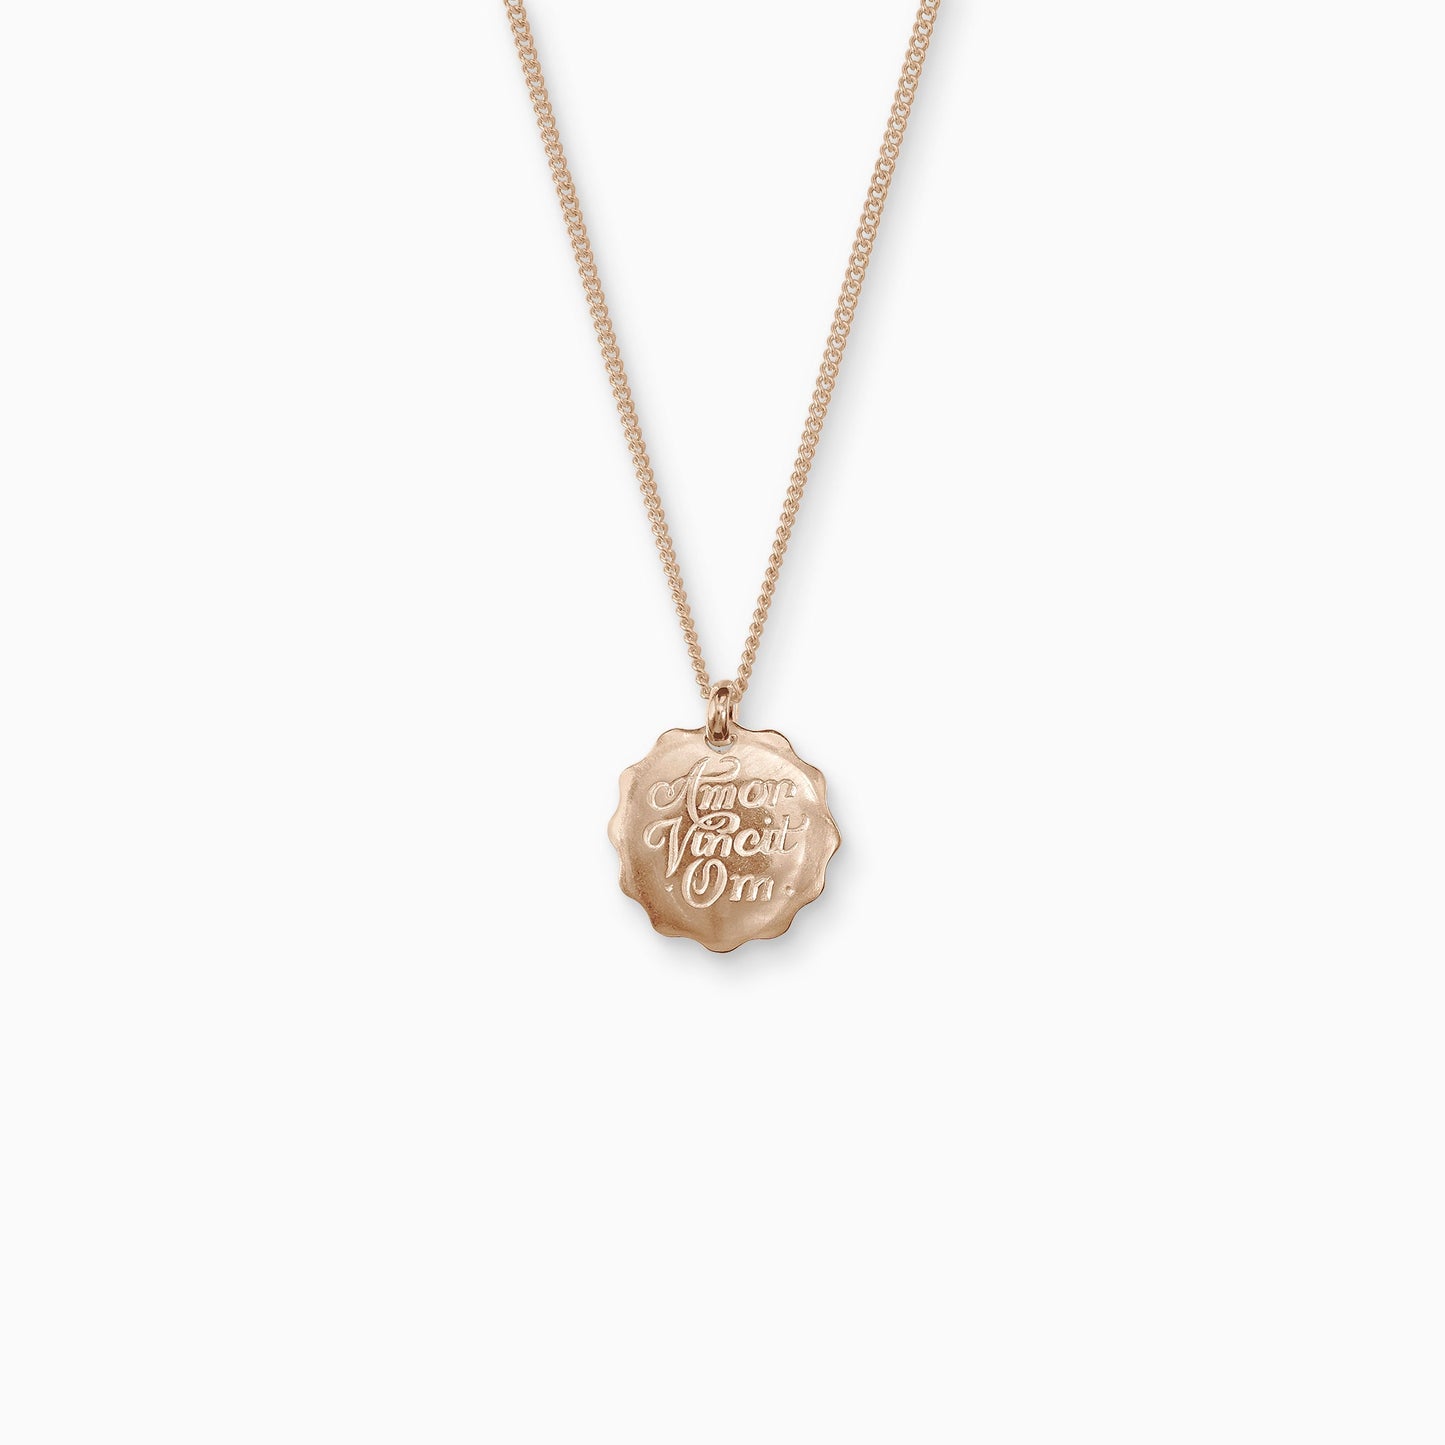 18ct Fairtrade rose gold round 22mm diameter charm on a 45cm fine curb chain. The pendant is smooth with a wavy outside edge. Amor Vincit Om, the Medieval Latin for Love Conquers All  is inscribed on the front in a Copperplate script. 